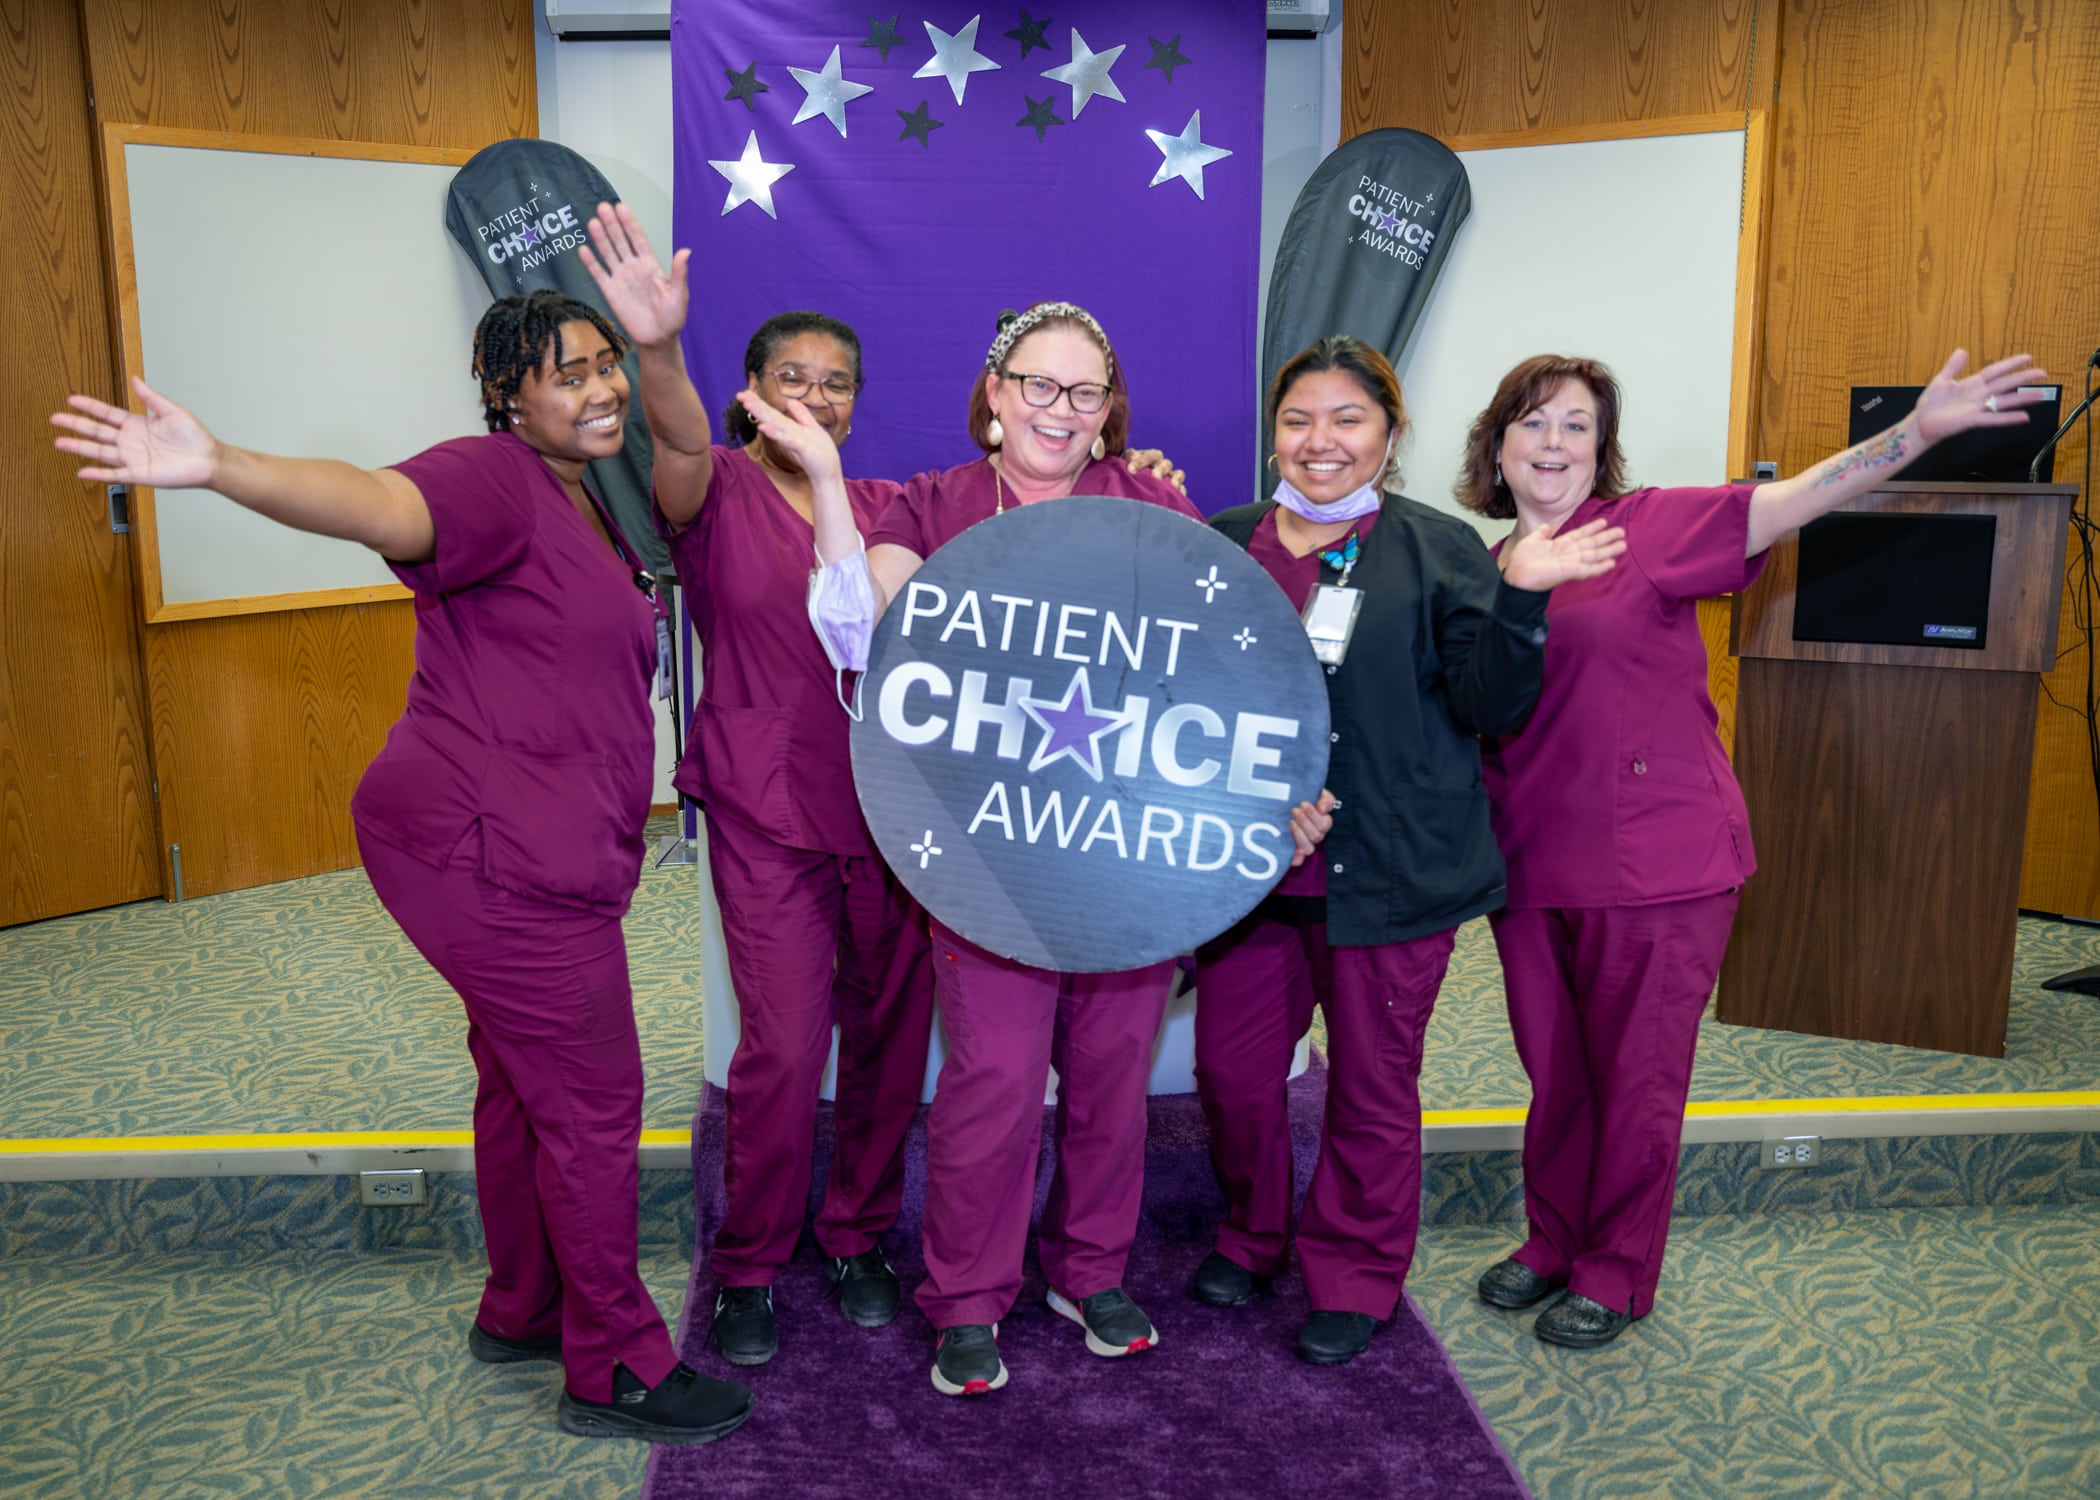 The ECU Health North Hospital team poses for a photo during the Patient Choice Awards presentation.